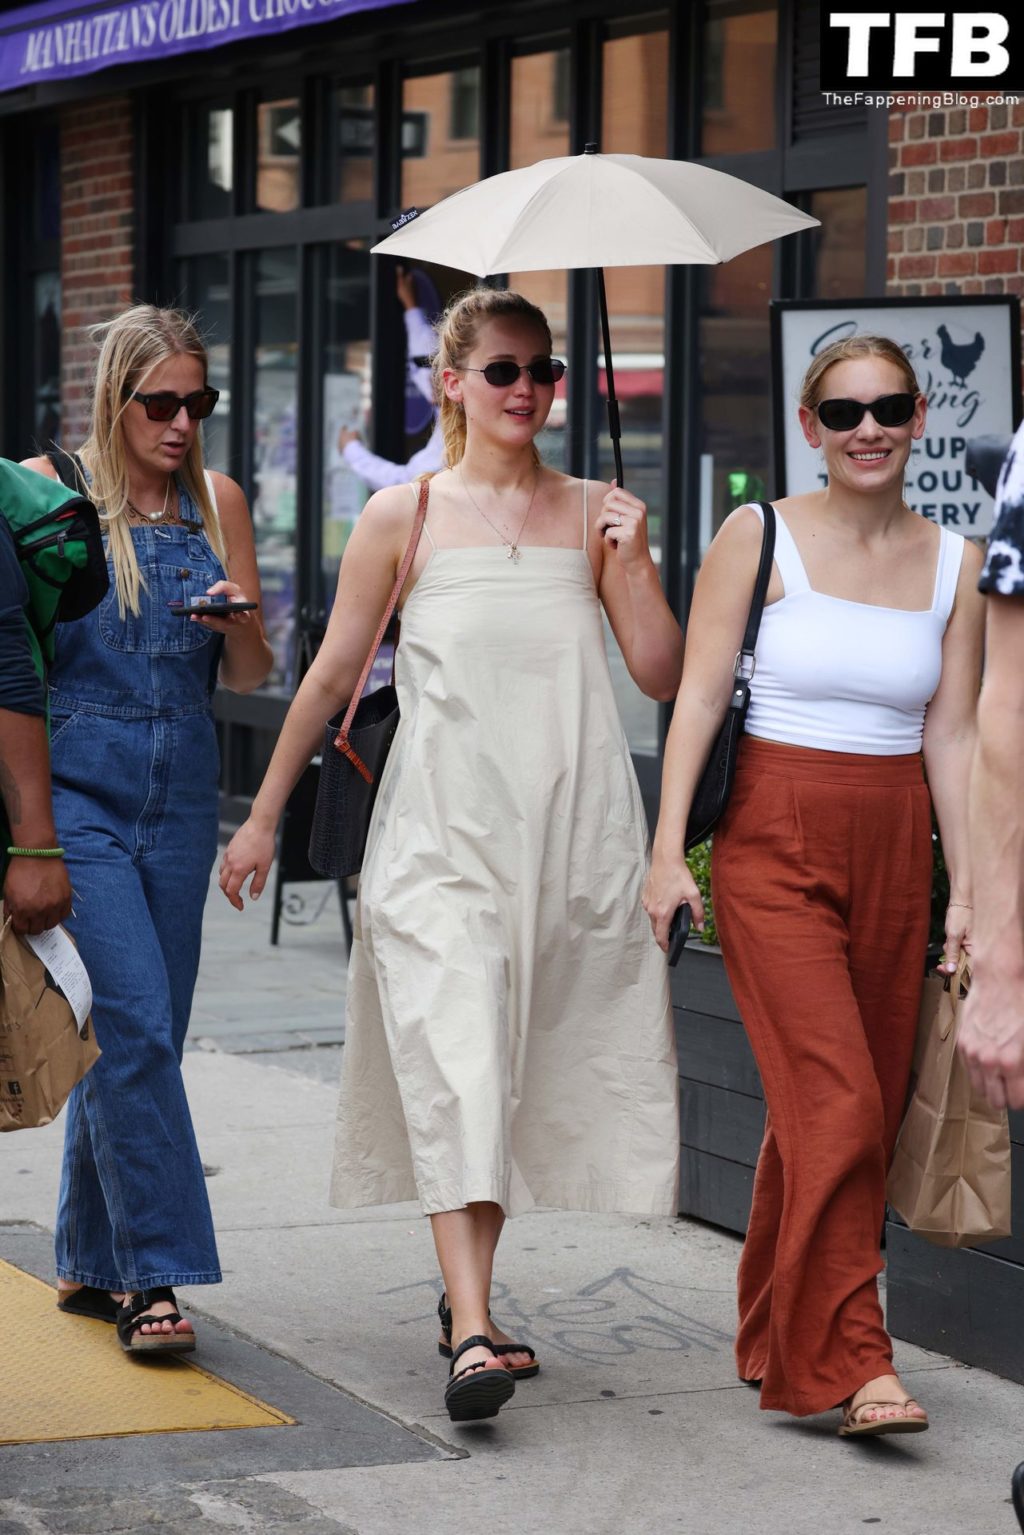 Jennifer Lawrence is Pictured Admiring a Woman Who is Wearing the Same Dress as Herself in NYC (47 Photos)